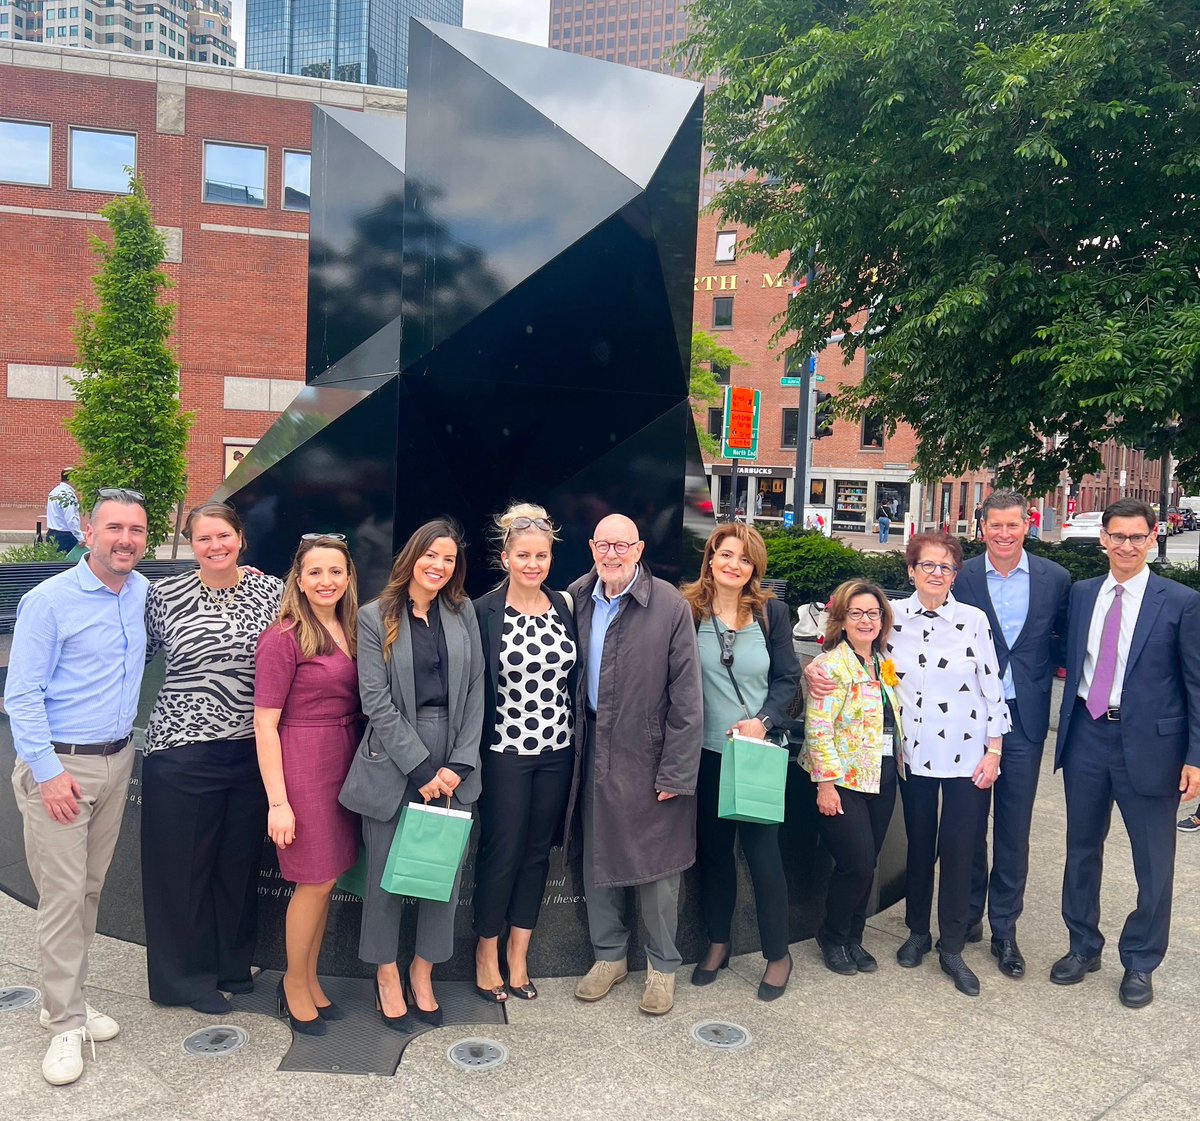 Today our @BankofAmerica teammates and I ventured out to the Armenian @Heritage__Park to kick off our #GreaterBoston Diversity and Inclusion education series. A special way to celebrate the rich cultural diversity across Mass. and learn how this impressive park came to be.